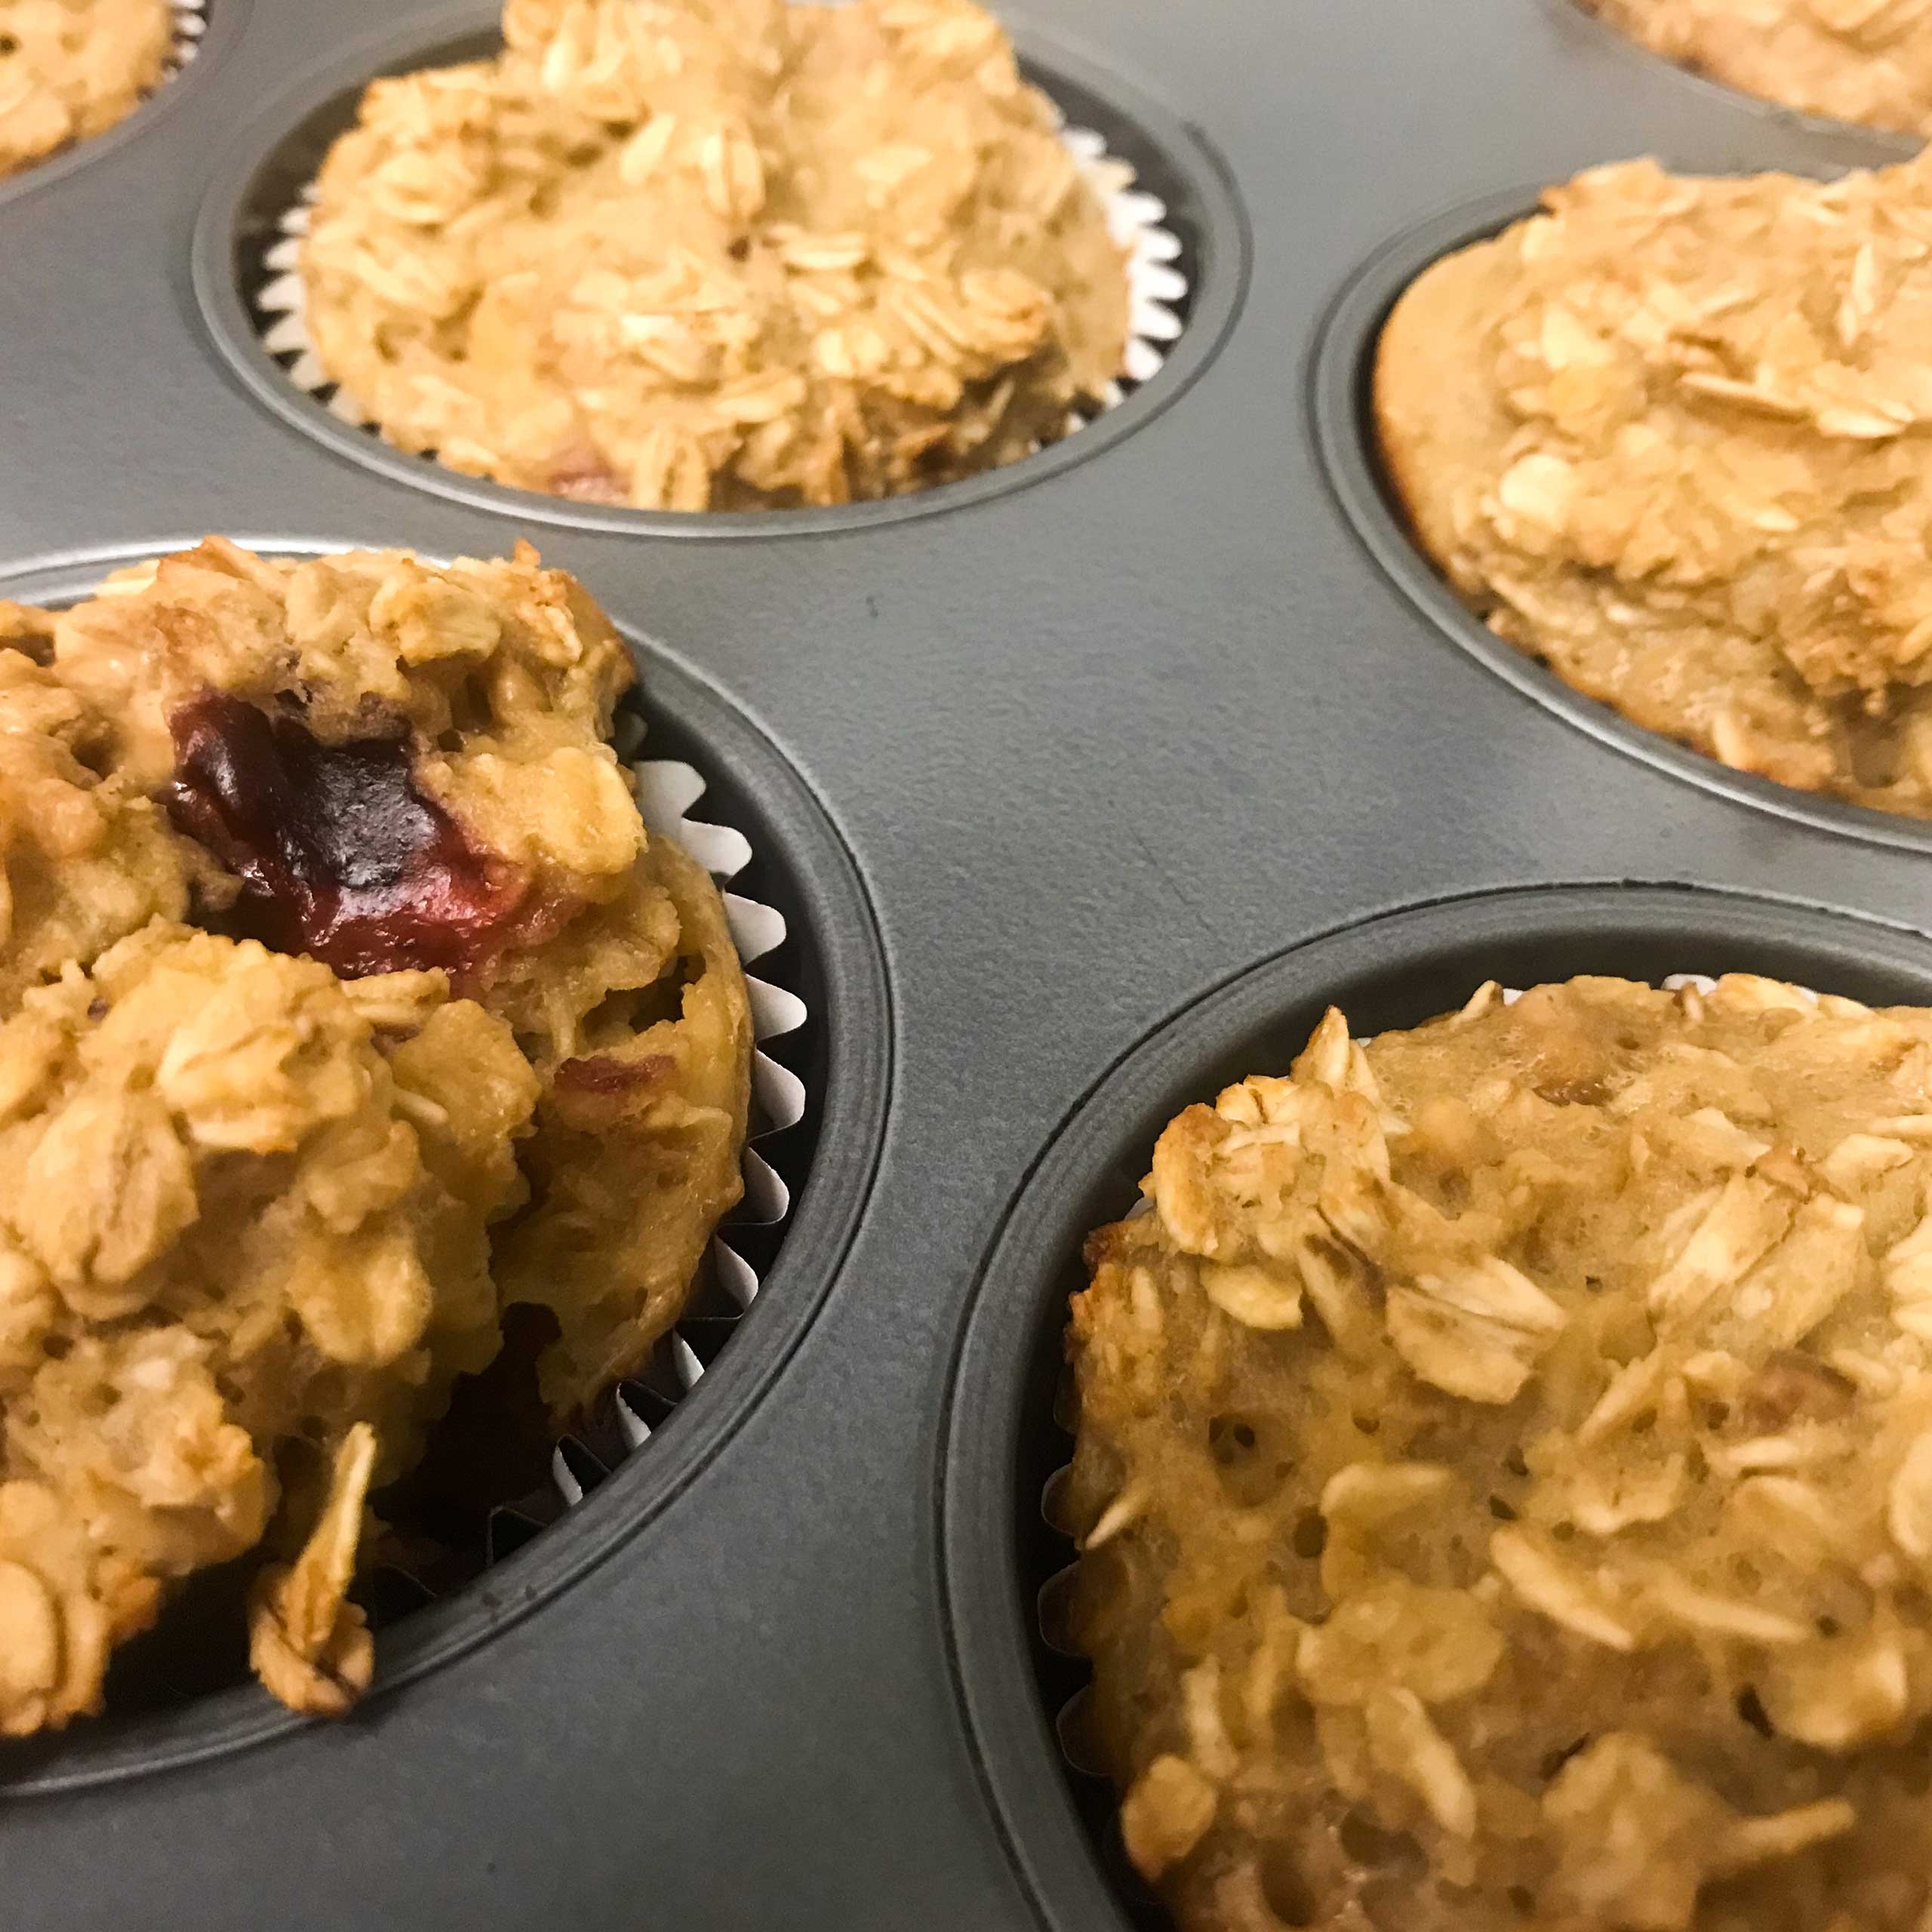 peanut-butter-and-jelly-oatmeal-muffins-4